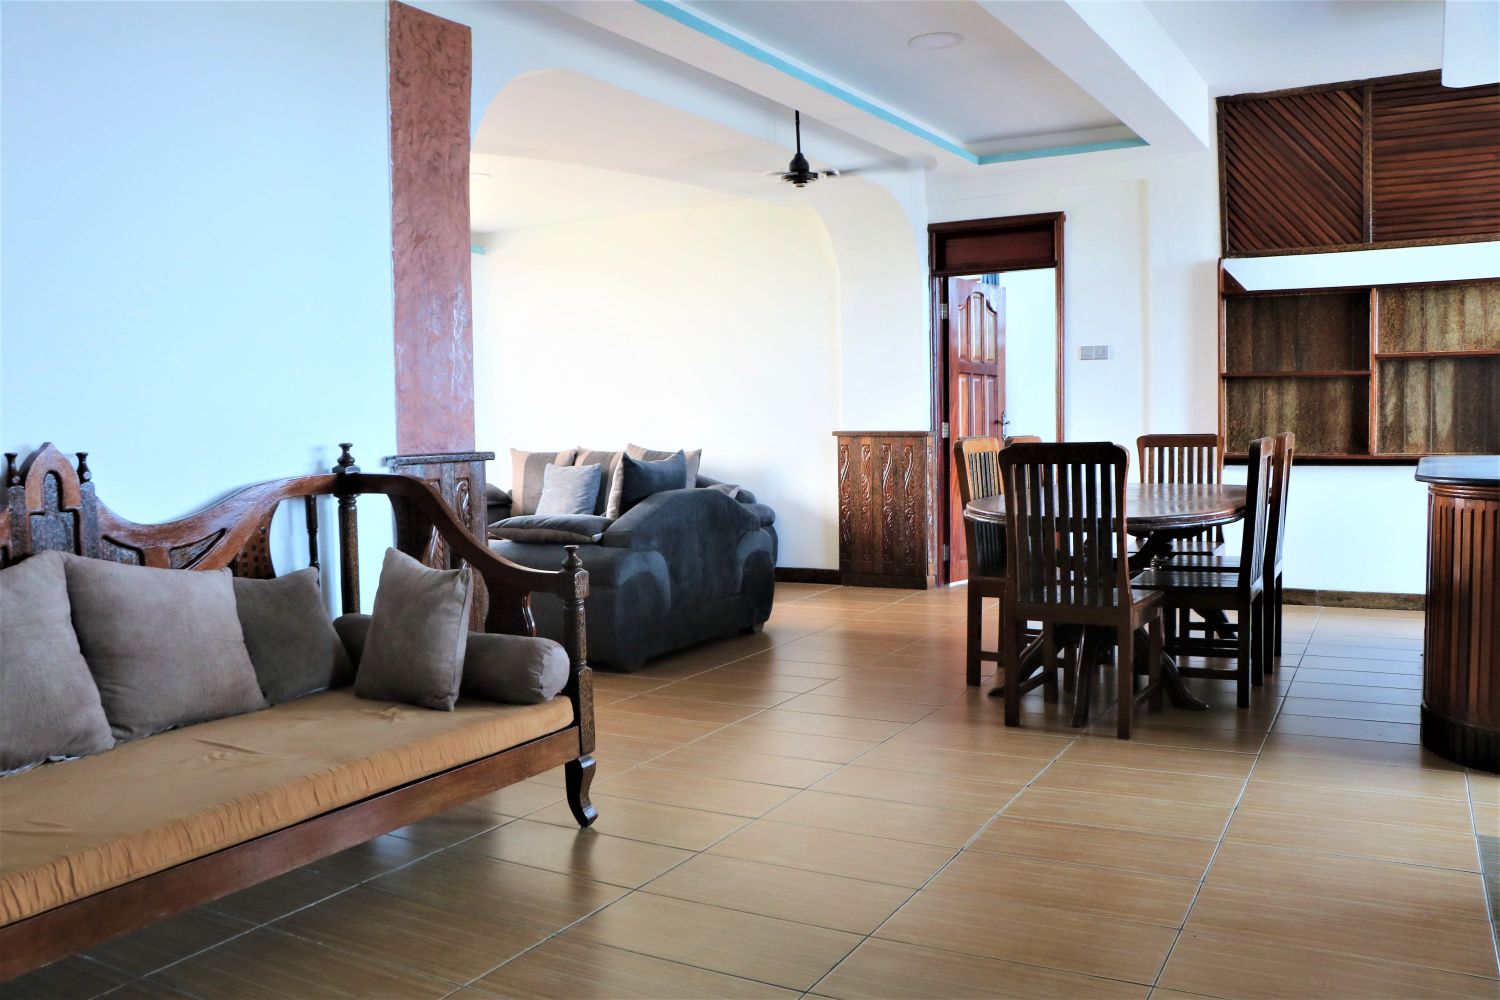 2bedroom apartment in Mombasa near beach. Affordable furnished Apartment for vacation in Mombasa | Zuru Life Africa